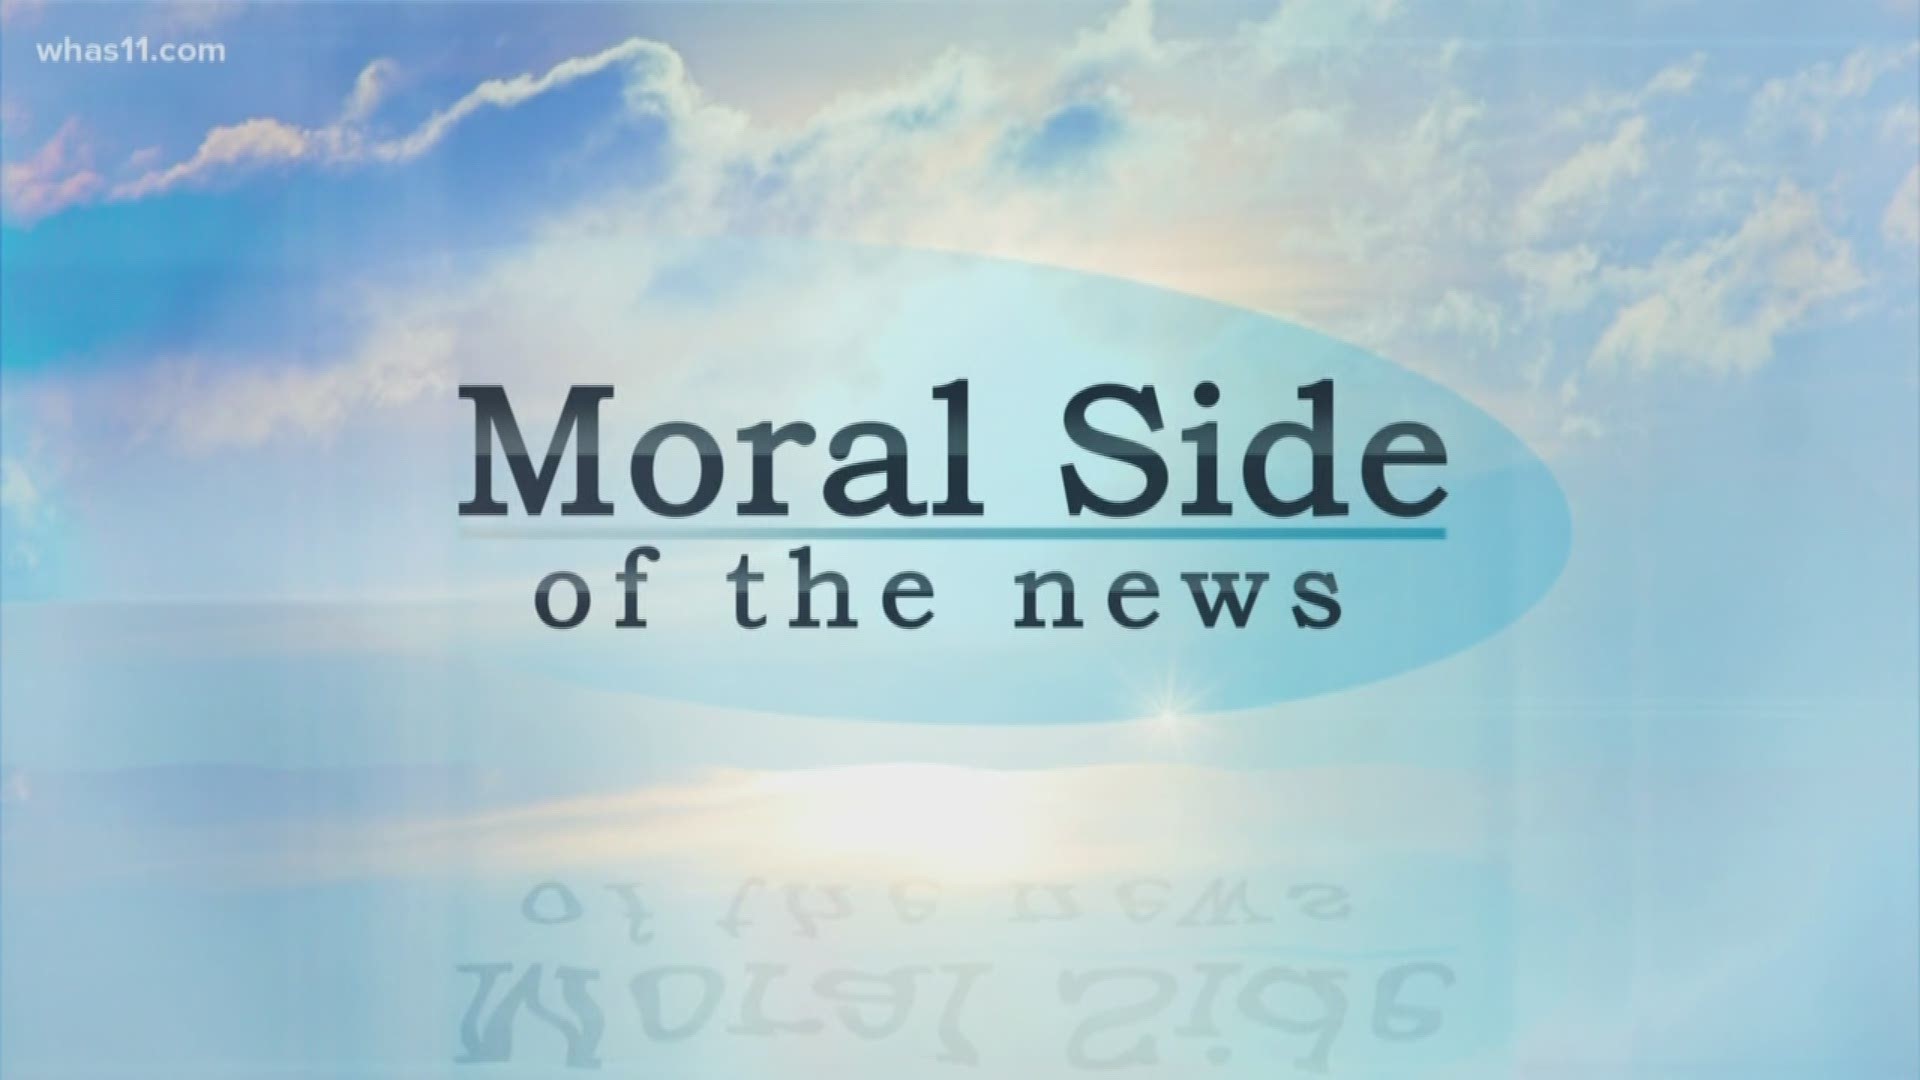 Moral Side of the News: July 9, 2018